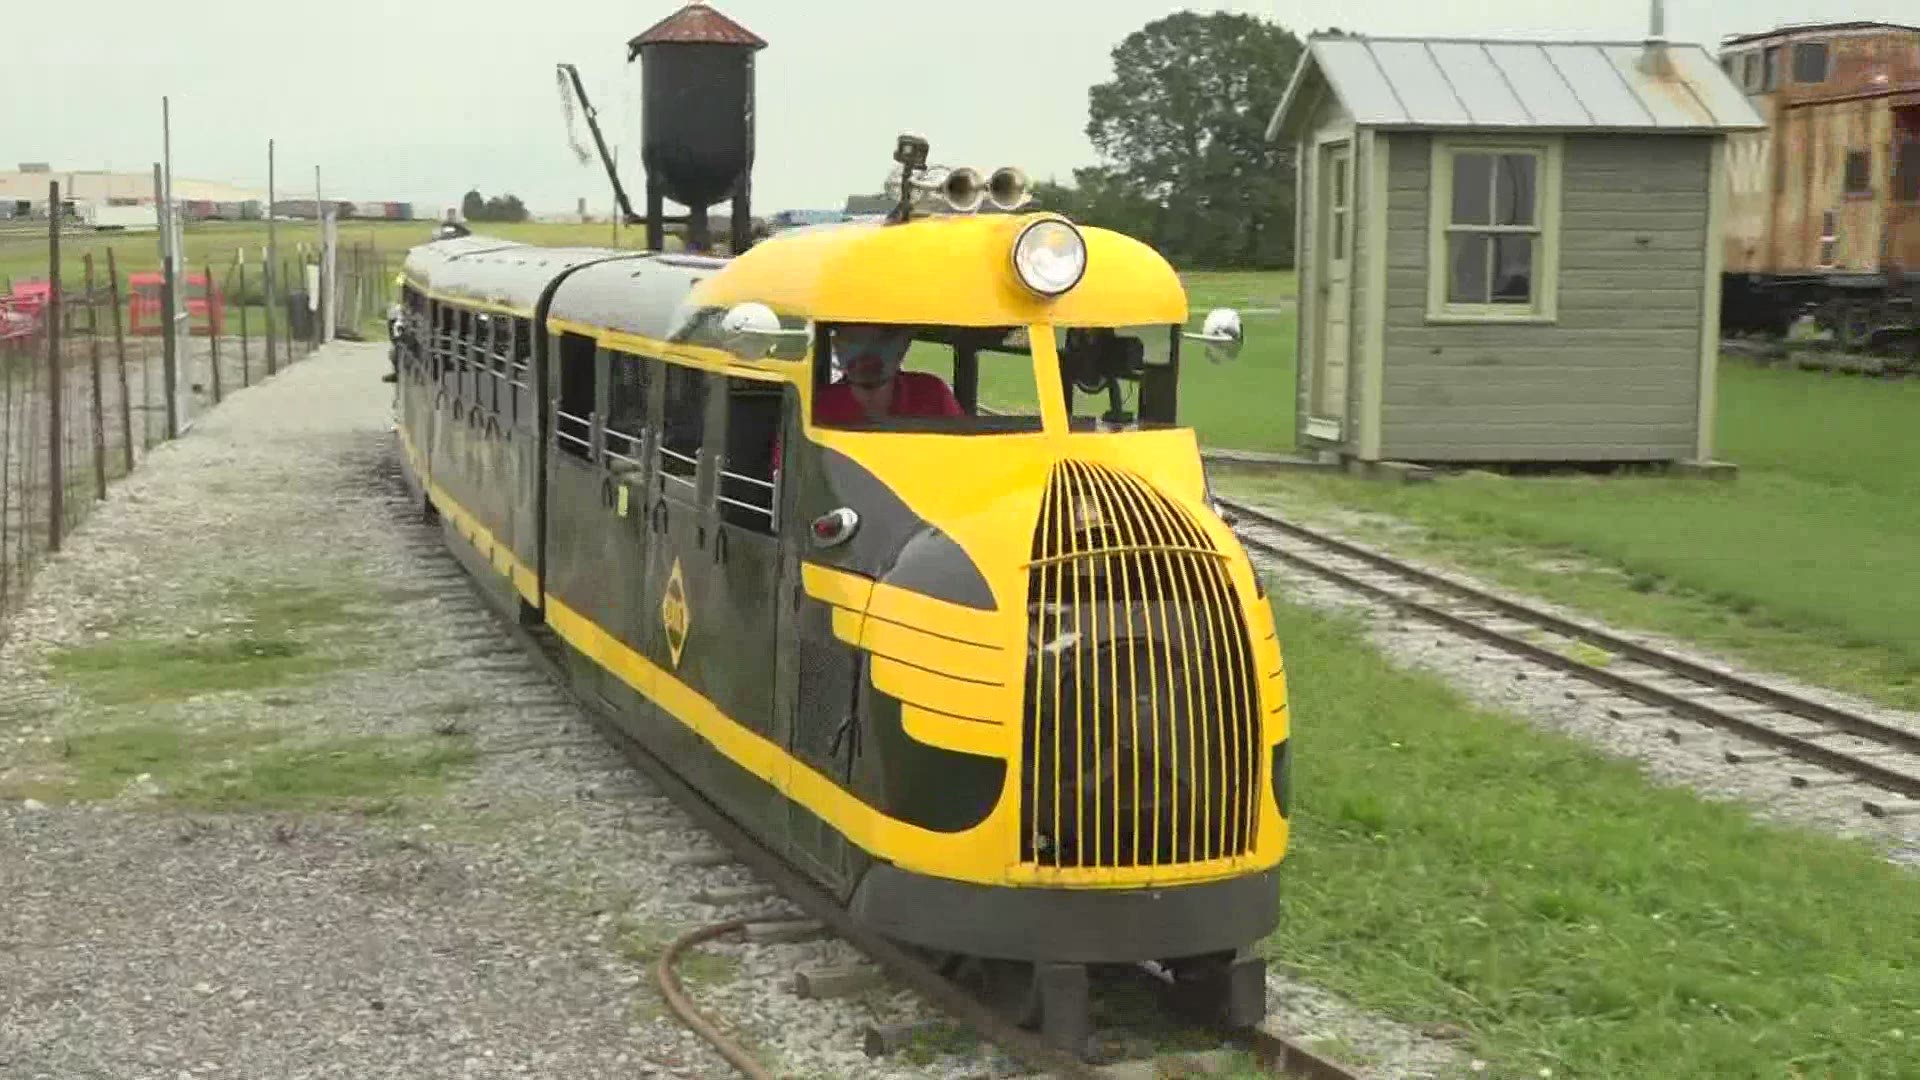 The annual event at the Northwest Ohio Railroad Preservation usually raises about a quarter of the groups annual budget